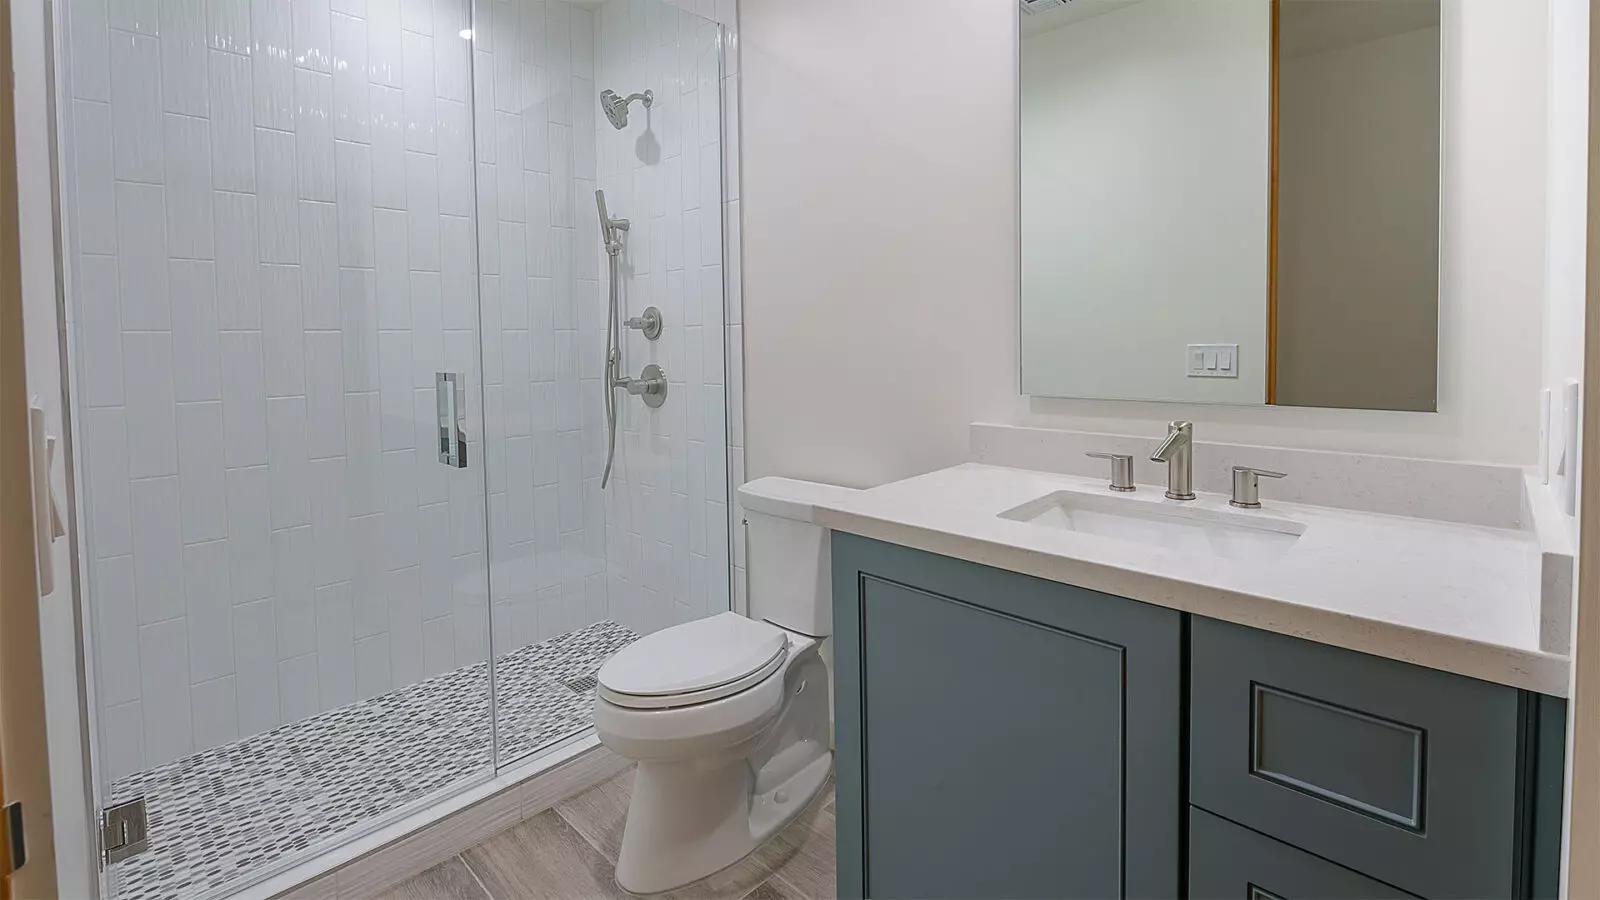 A Phoenix Contemporary designed bathroom with a shower and toilet